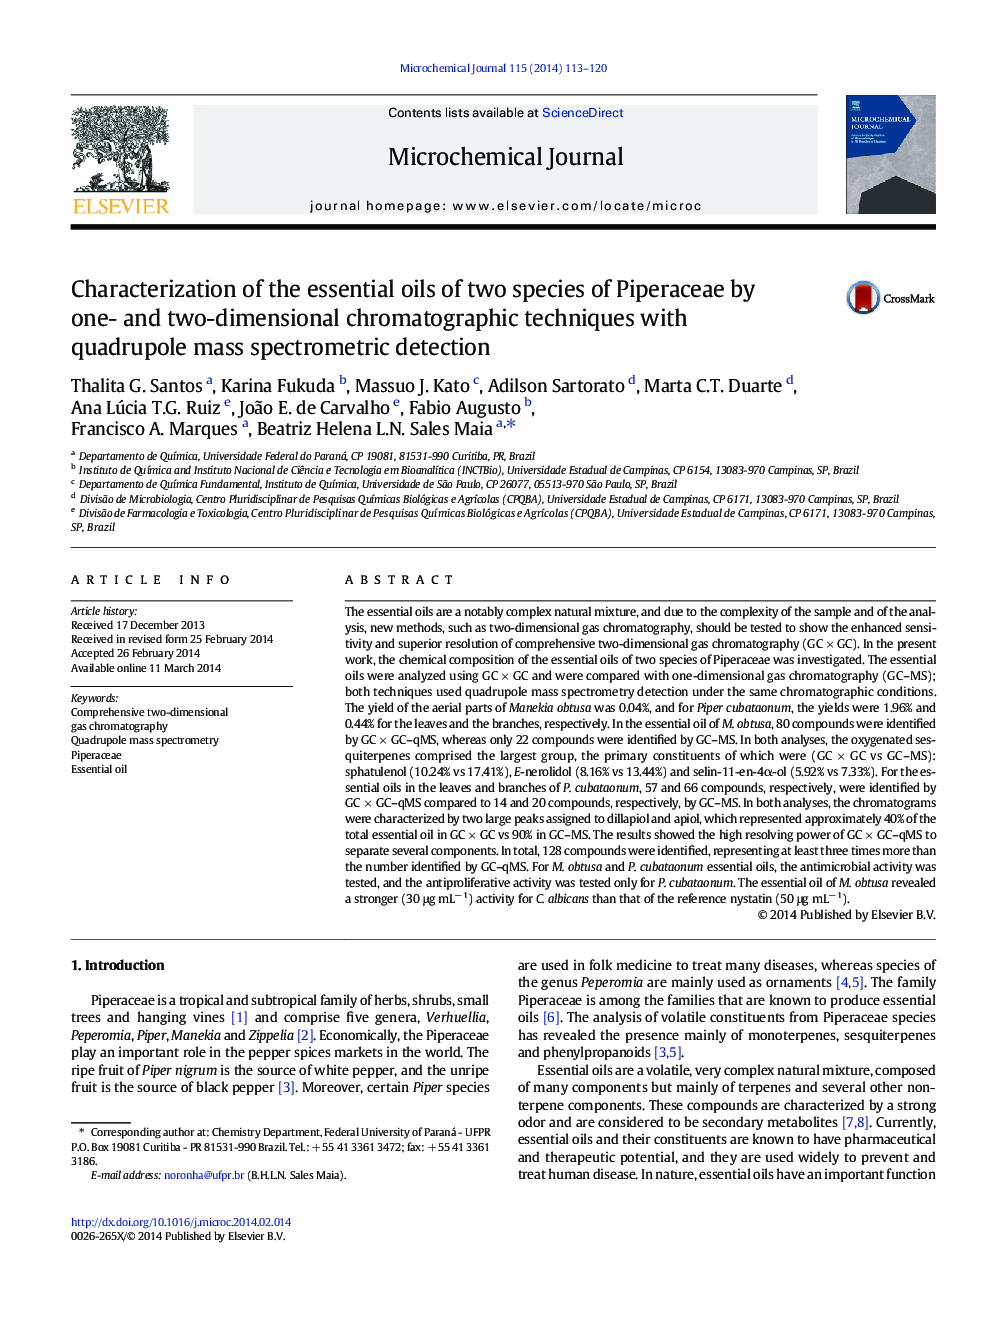 Characterization of the essential oils of two species of Piperaceae by one- and two-dimensional chromatographic techniques with quadrupole mass spectrometric detection